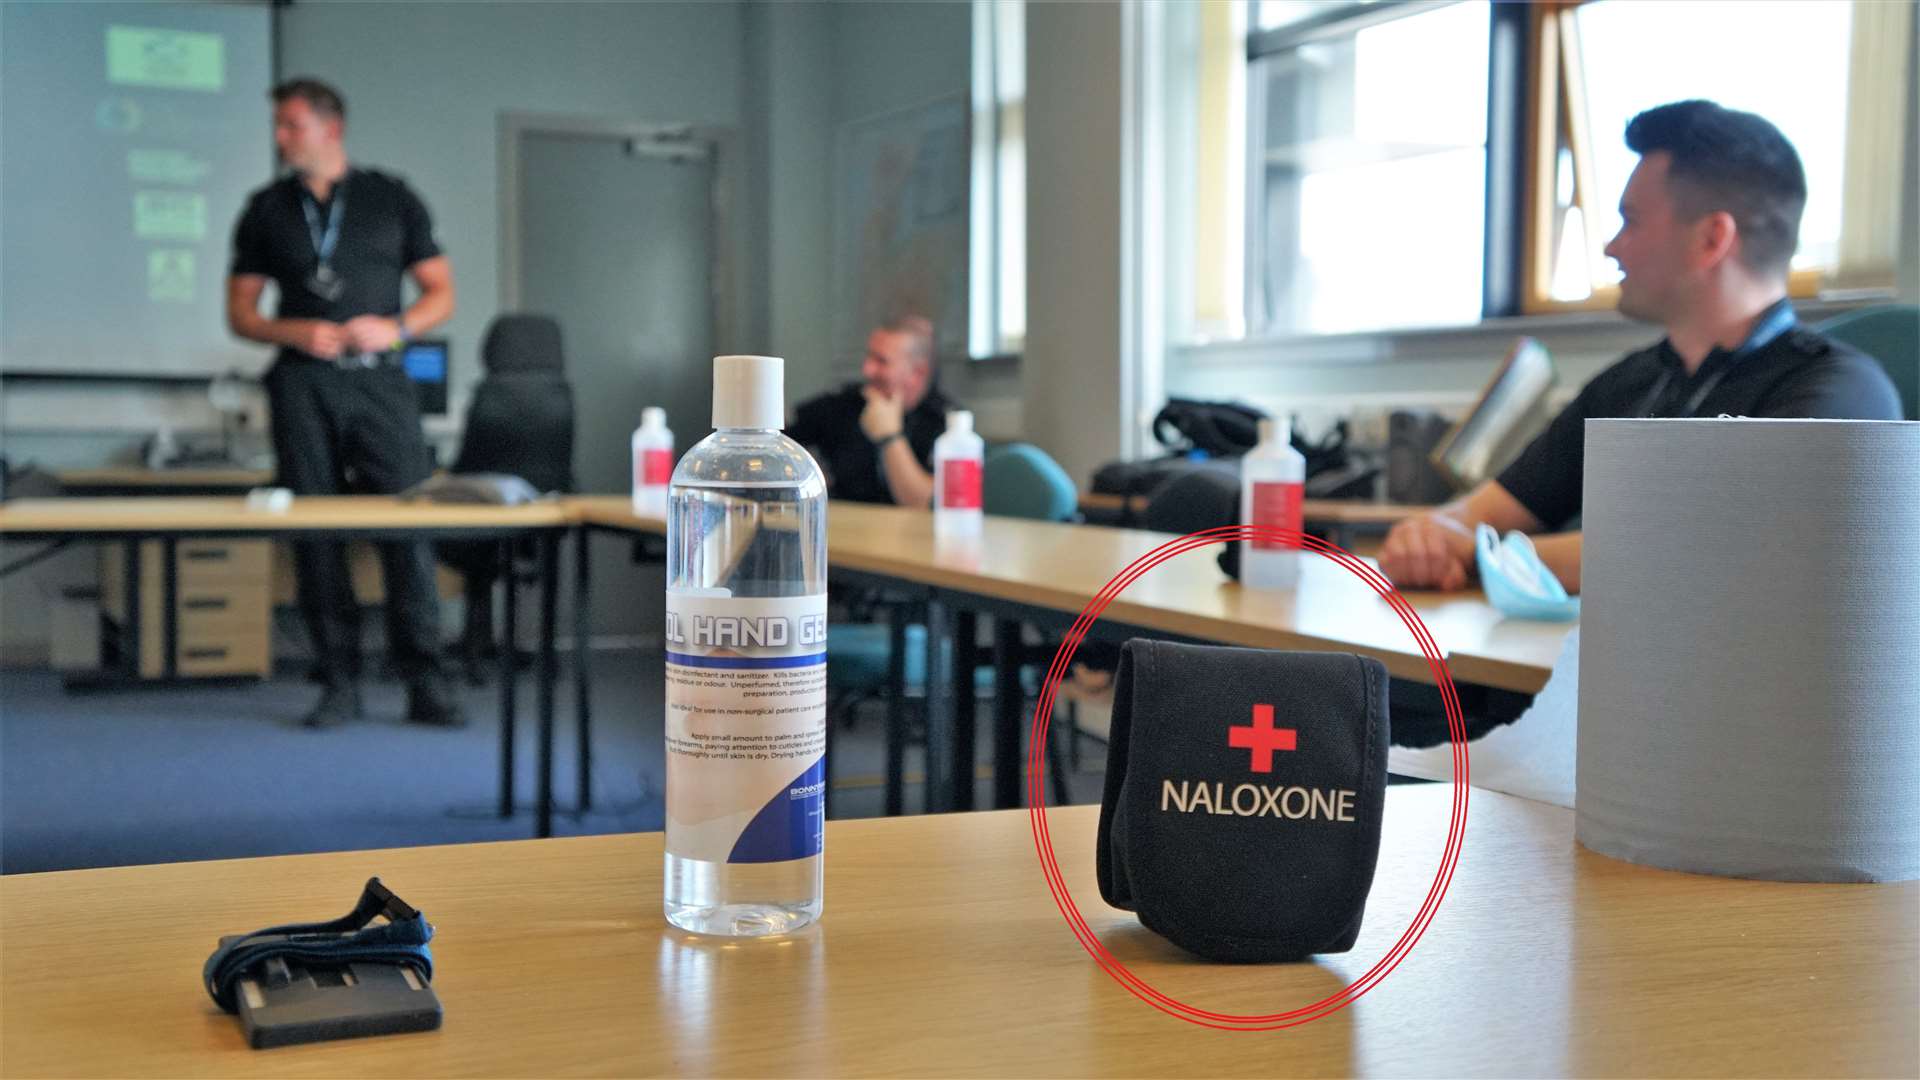 The special pouch that officers will carry with the Naloxone spray inside. Pictures: DGS